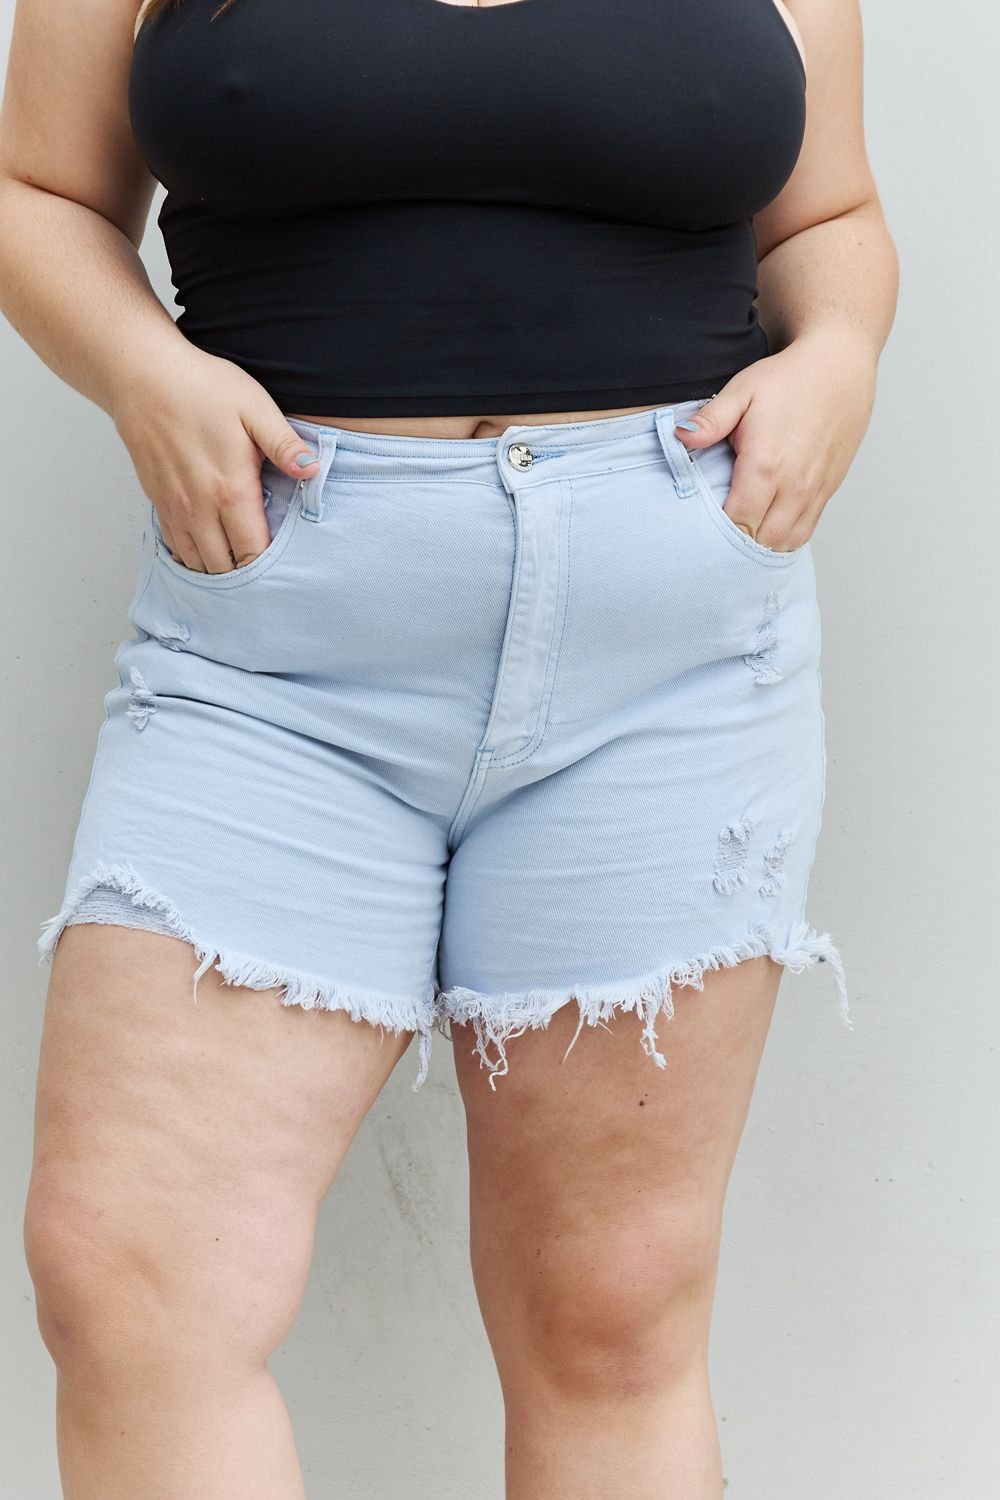 RISEN Katie Full Size High Waisted Distressed Shorts in Ice Blue - pvmark